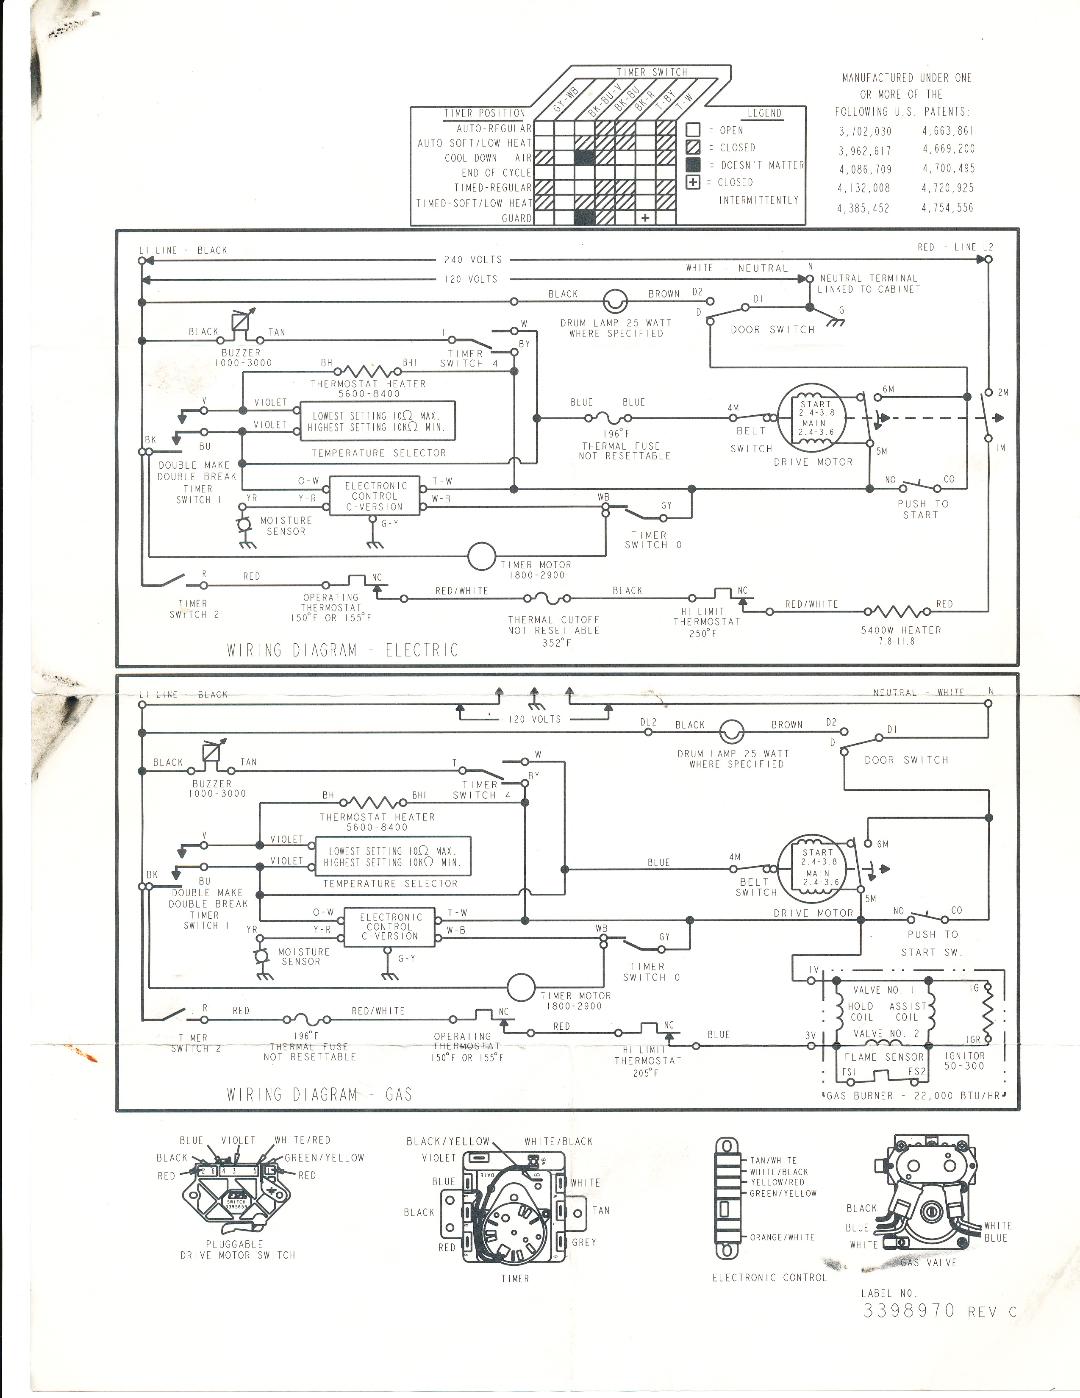 Do It Yourself: Kenmore dryer model 110, 90 series wiring schematic and parts schematic